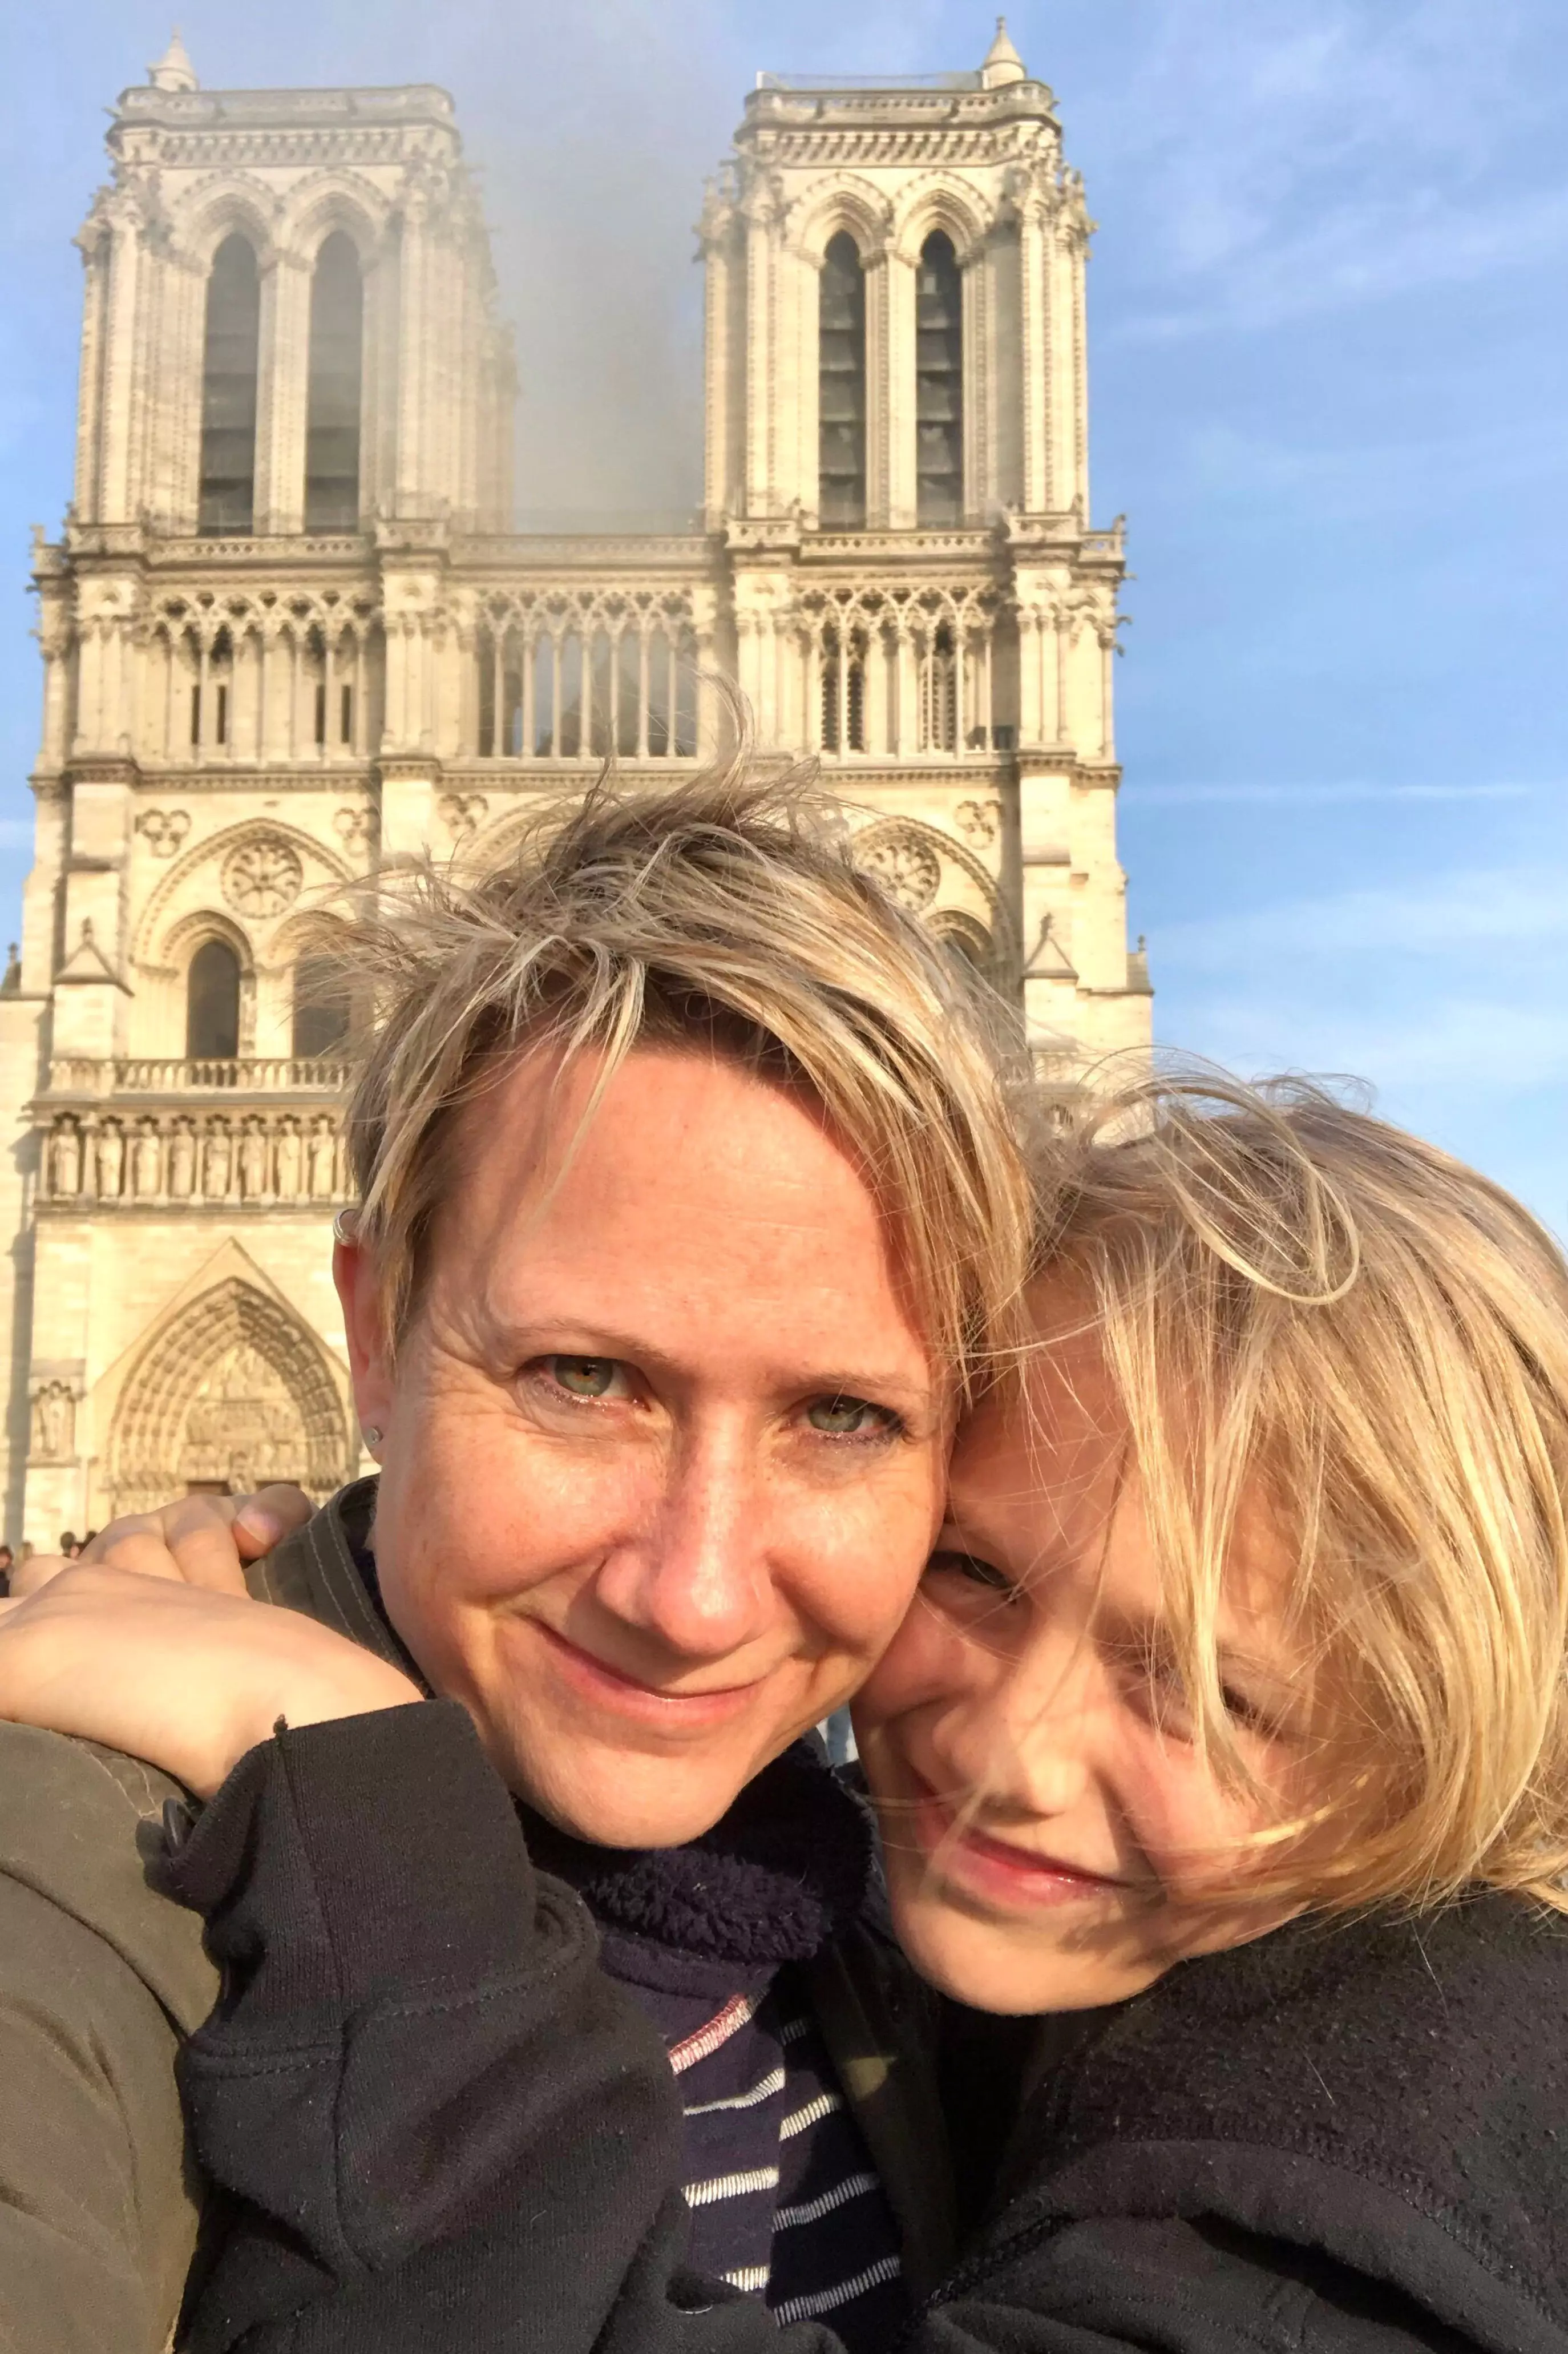 Suzanne was on a day trip with her son to celebrate his 11th birthday.